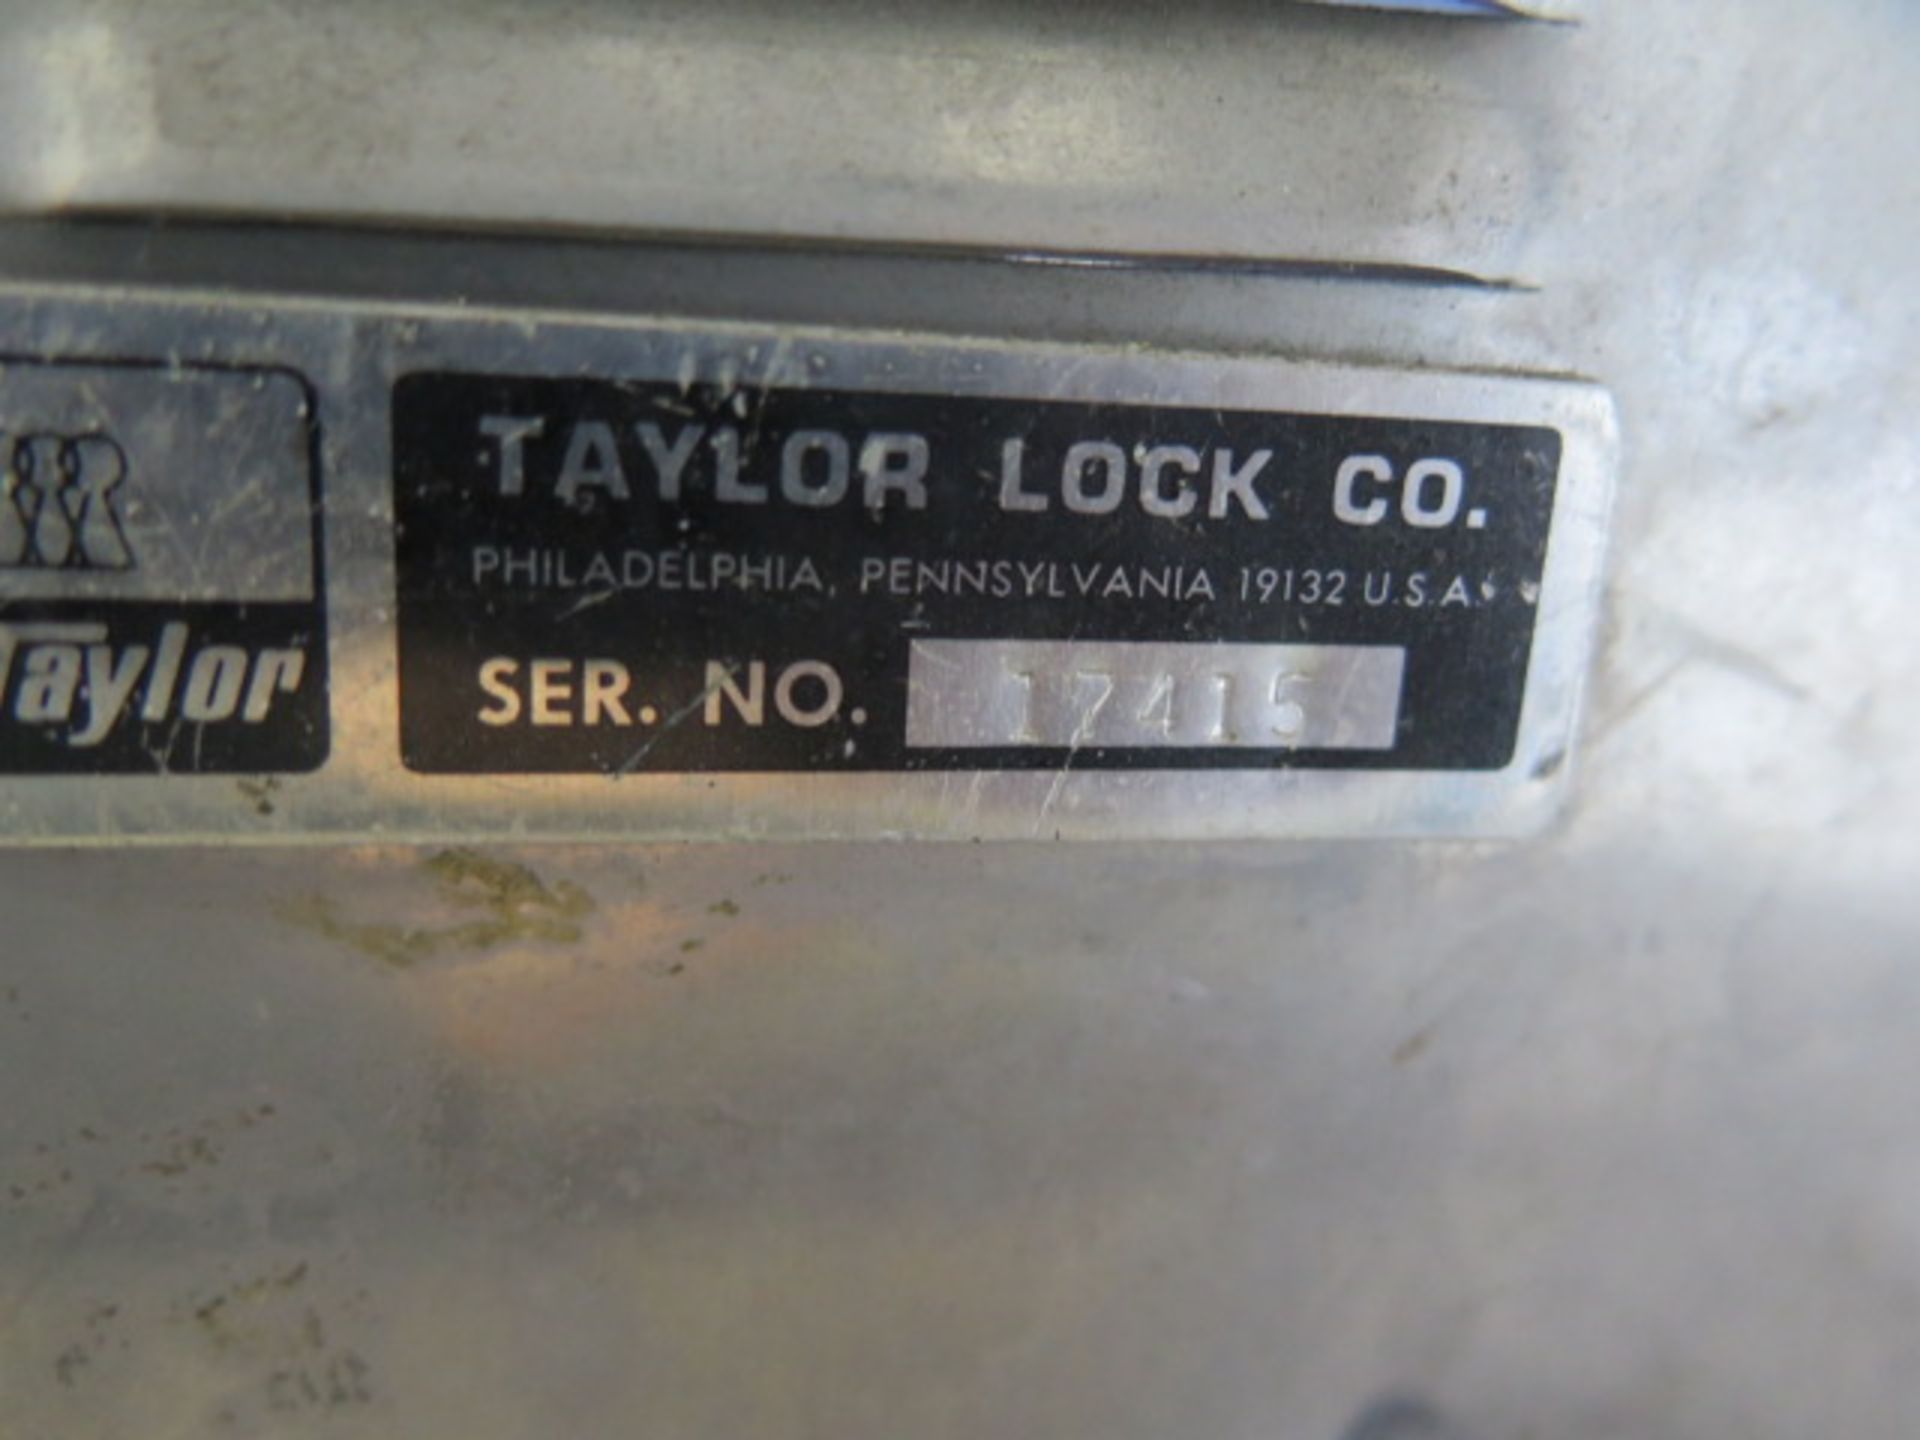 Taylor Lock Co. Key Duplicator Machine s/n 17415, (2) Curtis Key Cutters and Key Blanks - Image 5 of 7